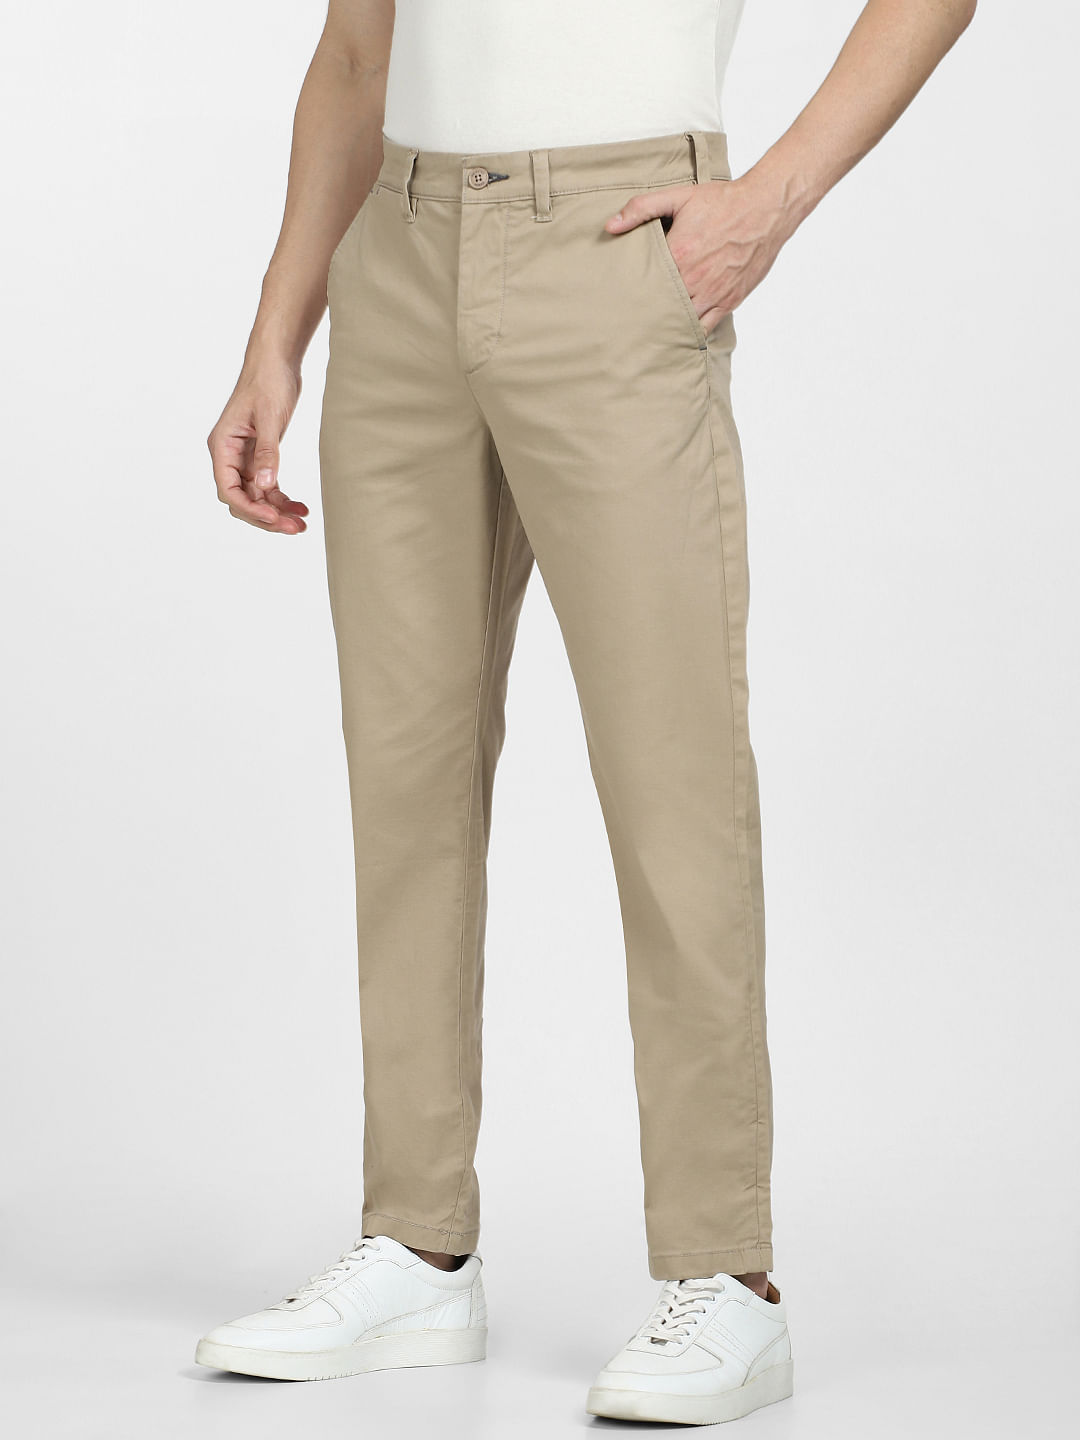 Buy Men's Spanish Grey Stretch Cotton Chinos Online In India